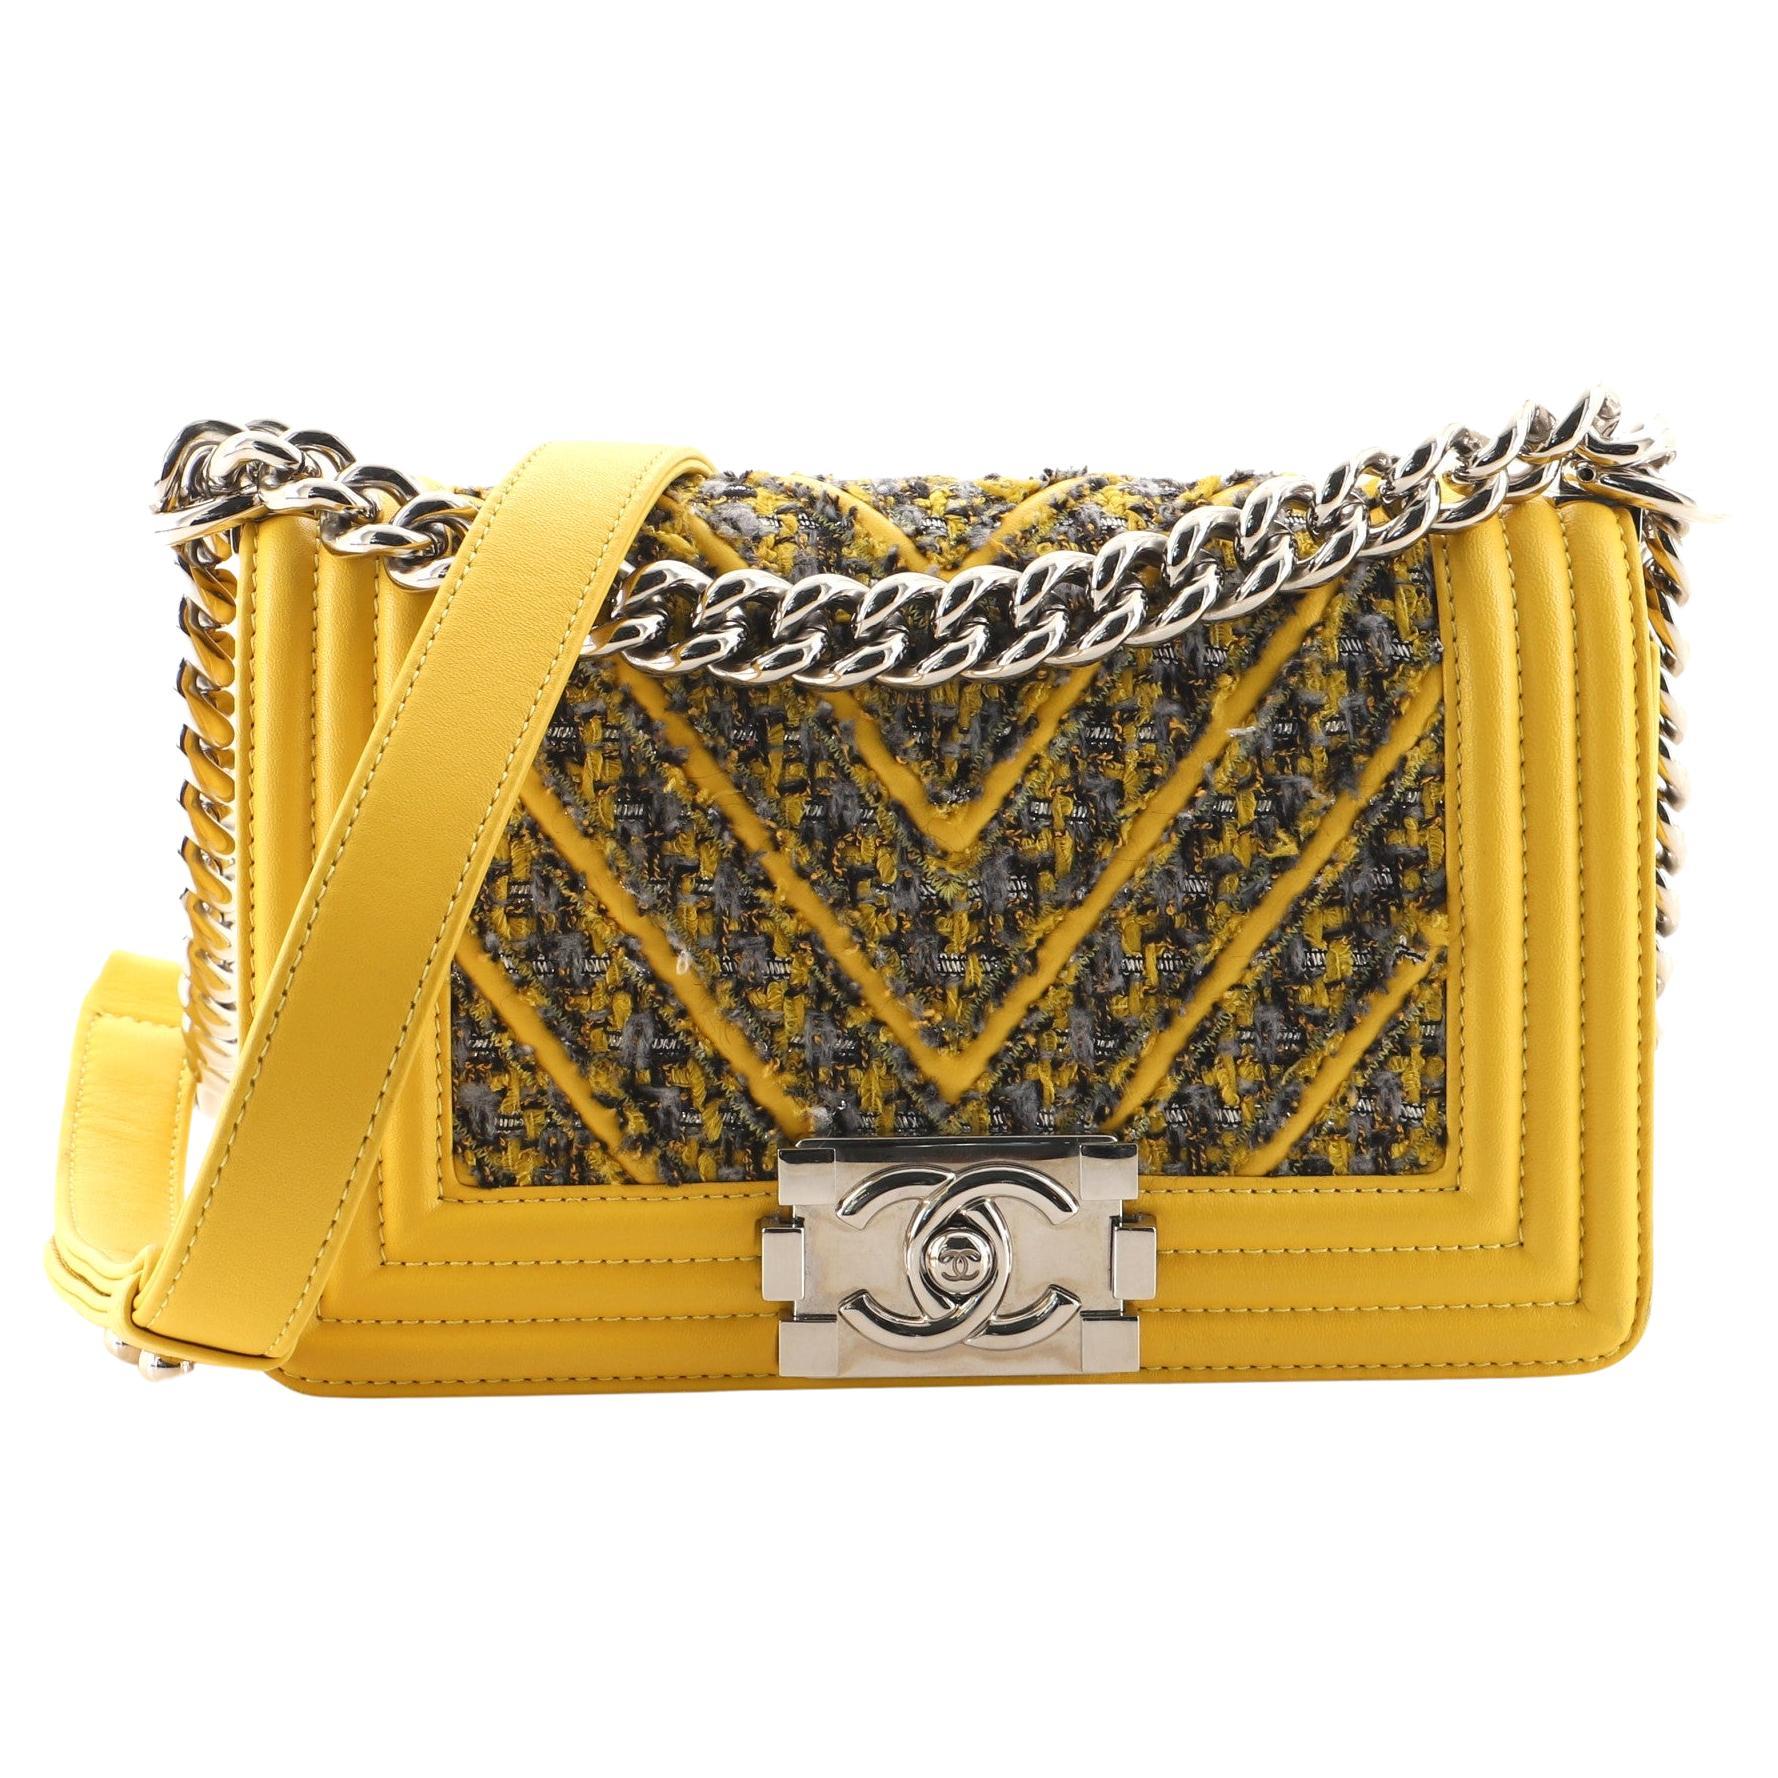 CHANEL Boy Caviar Quilted Zip Around Wallet Yellow